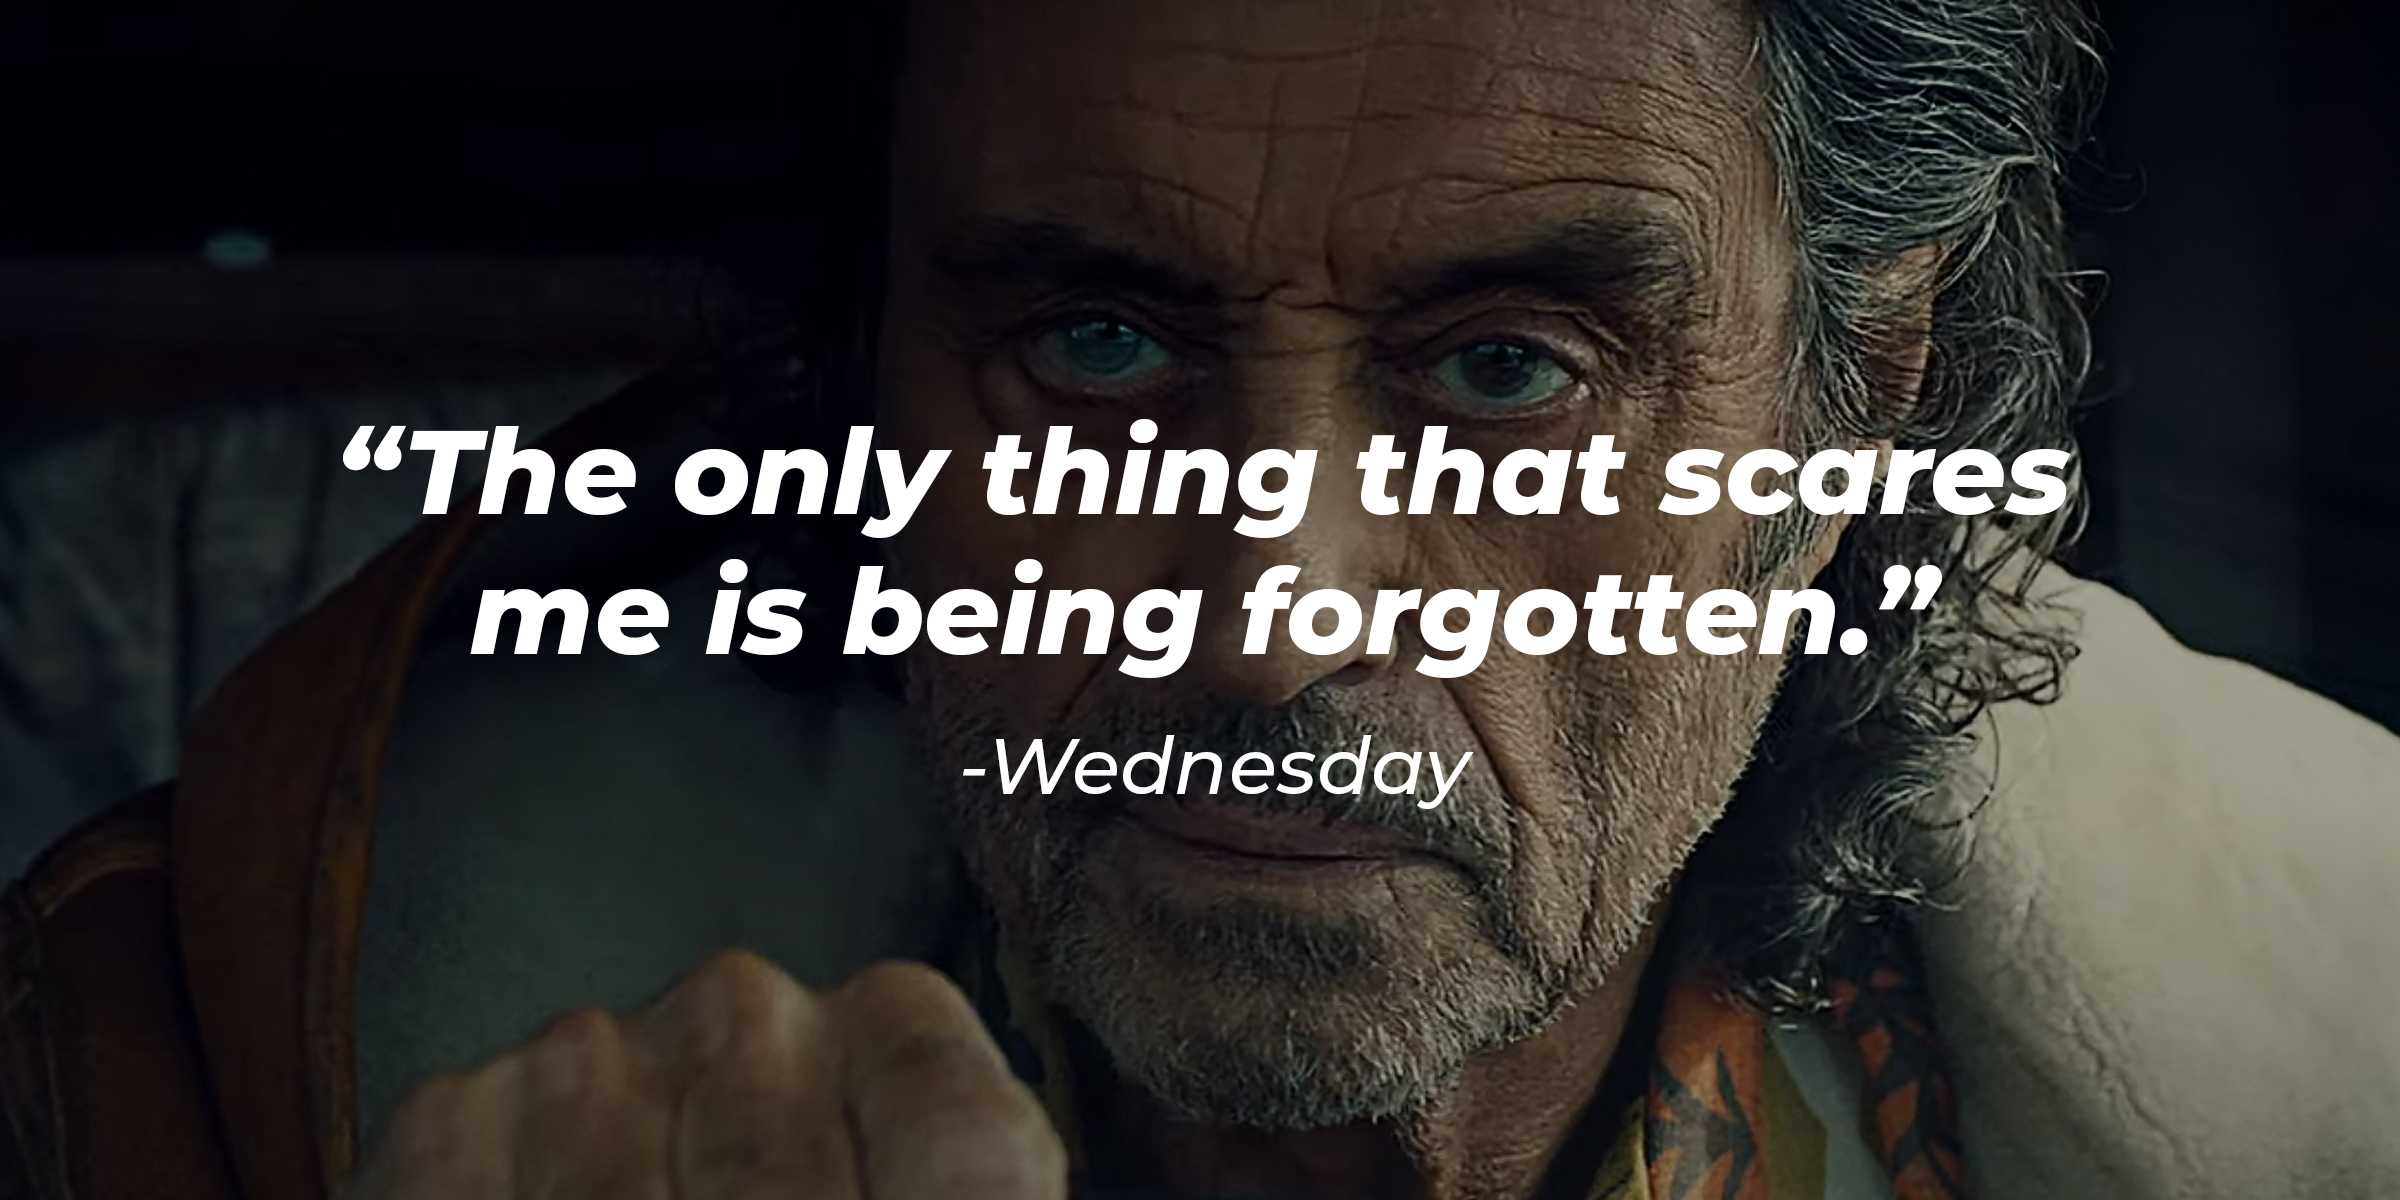 Wednesday's quote: "The only thing that scares me is being forgotten." | Source: Youtube.com/AmericanGodsIntl